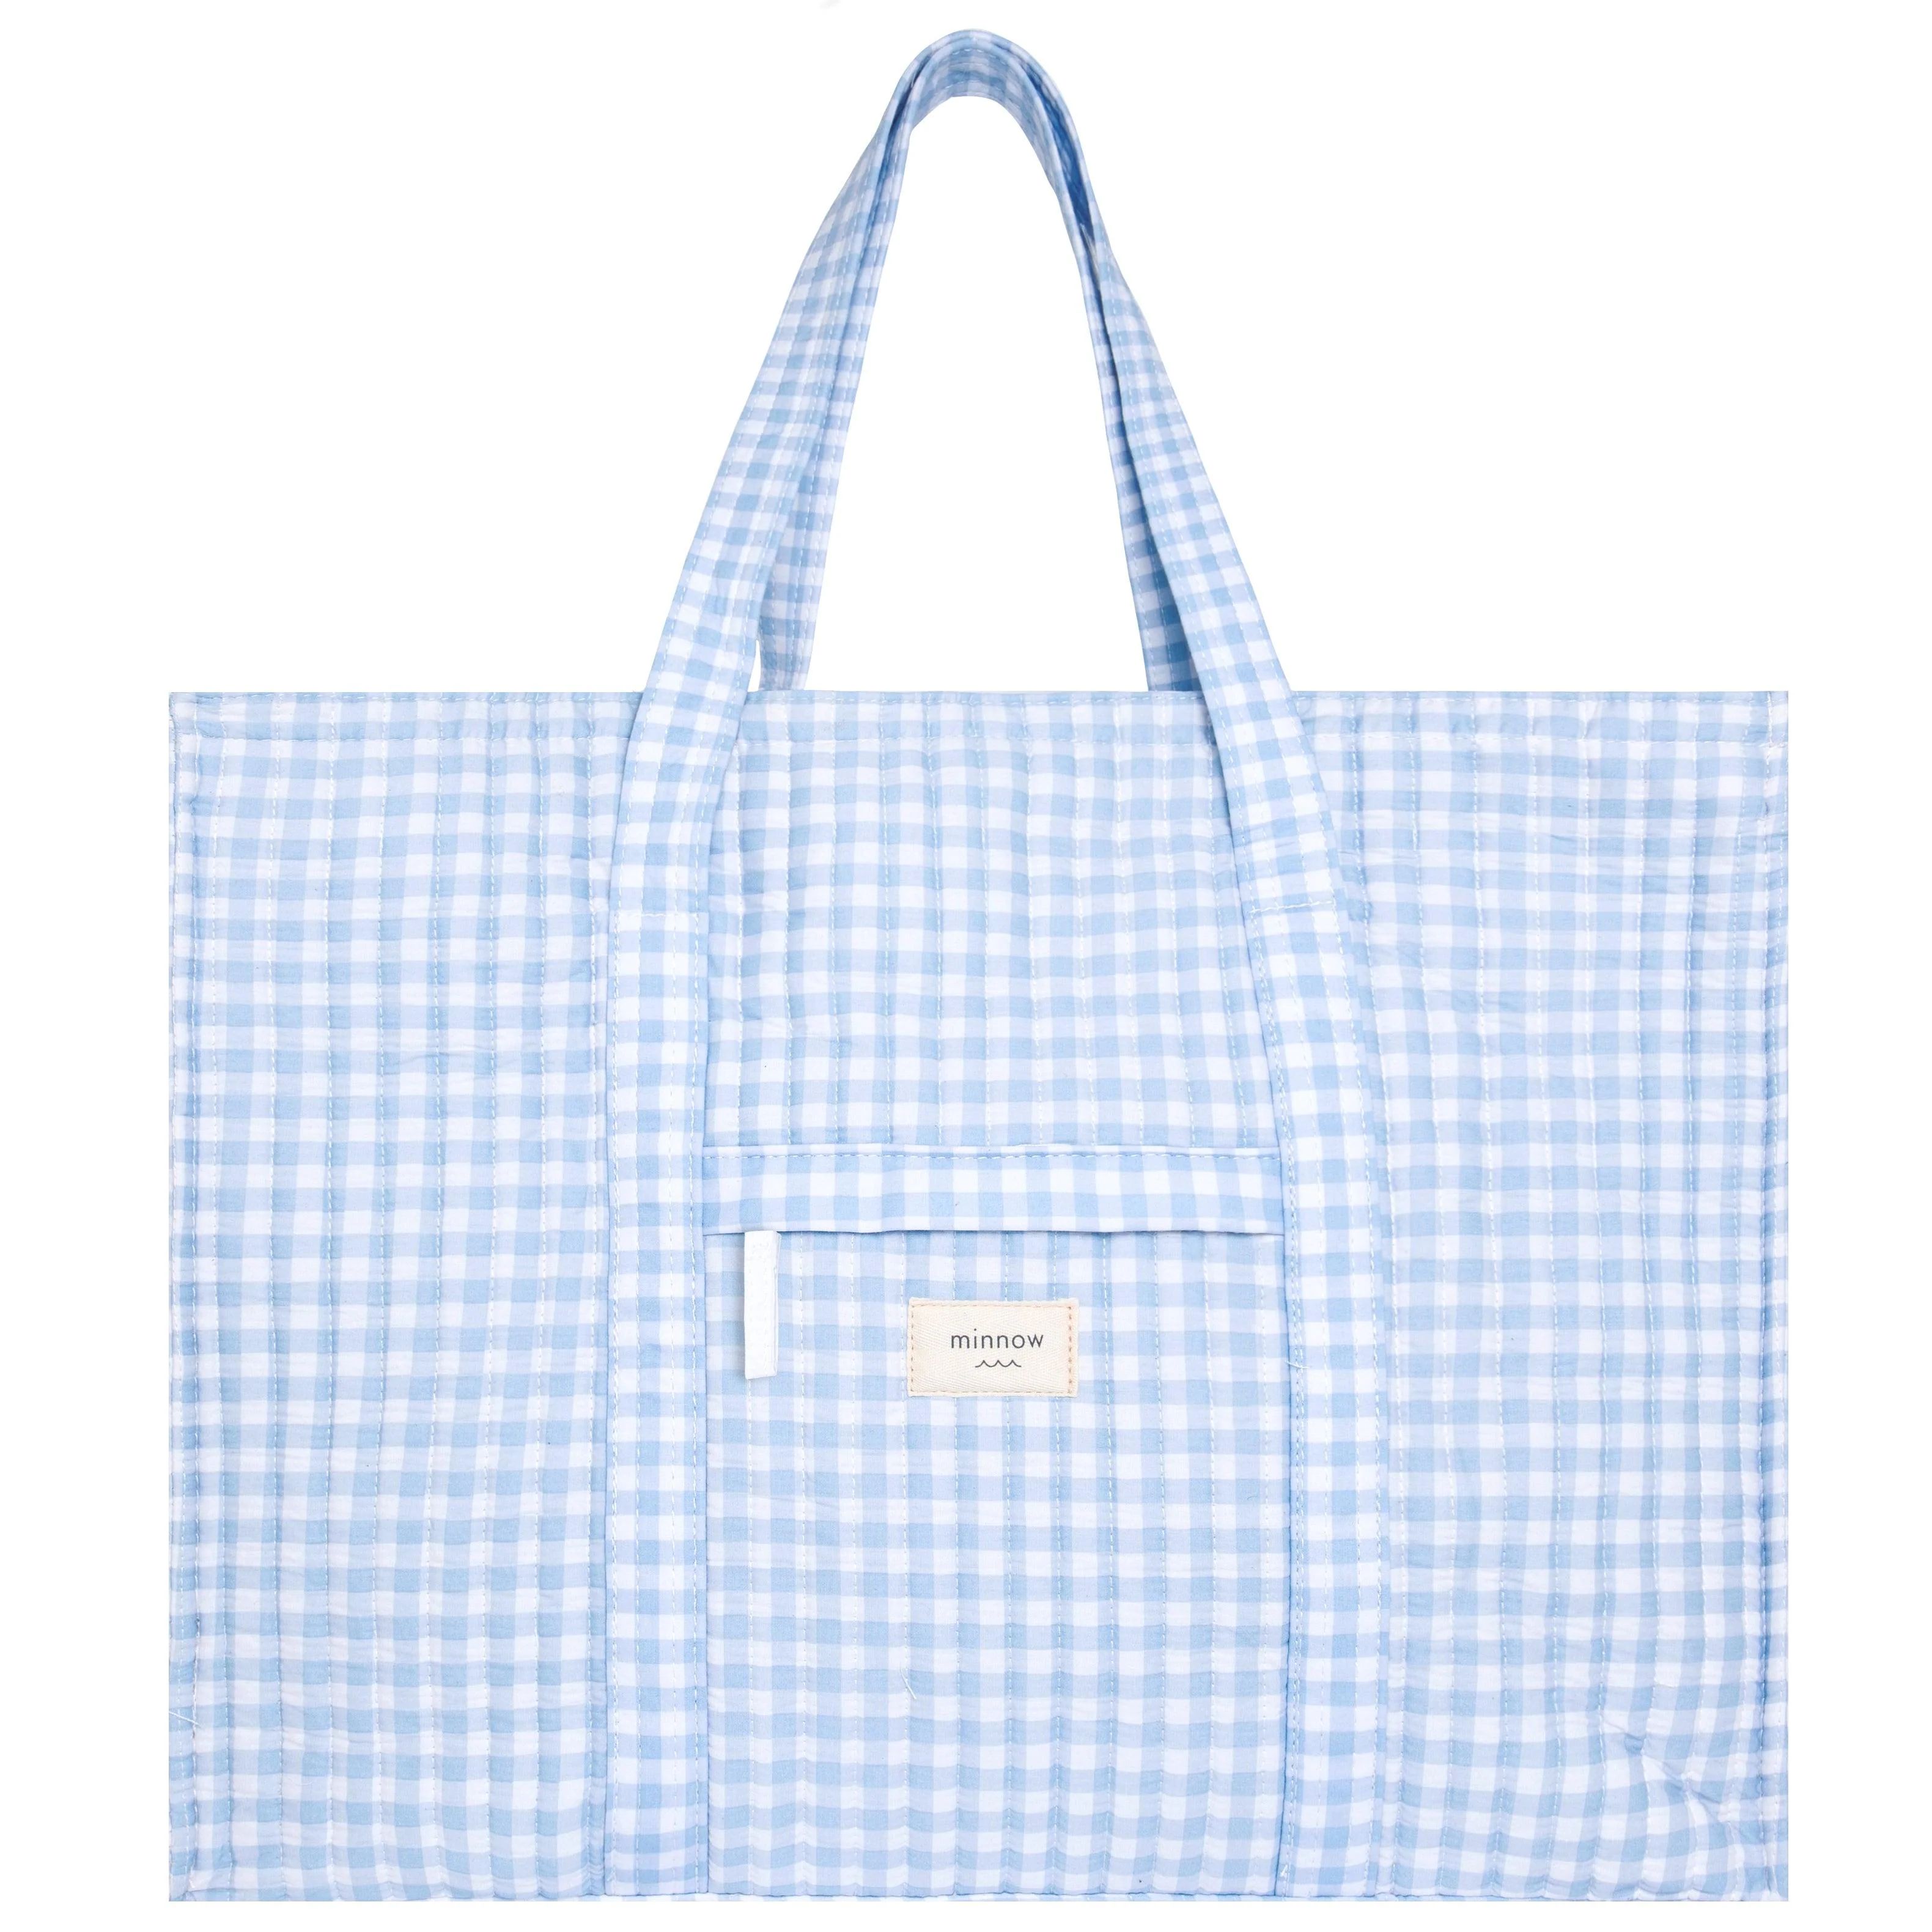 oasis blue gingham overnighter tote | minnow